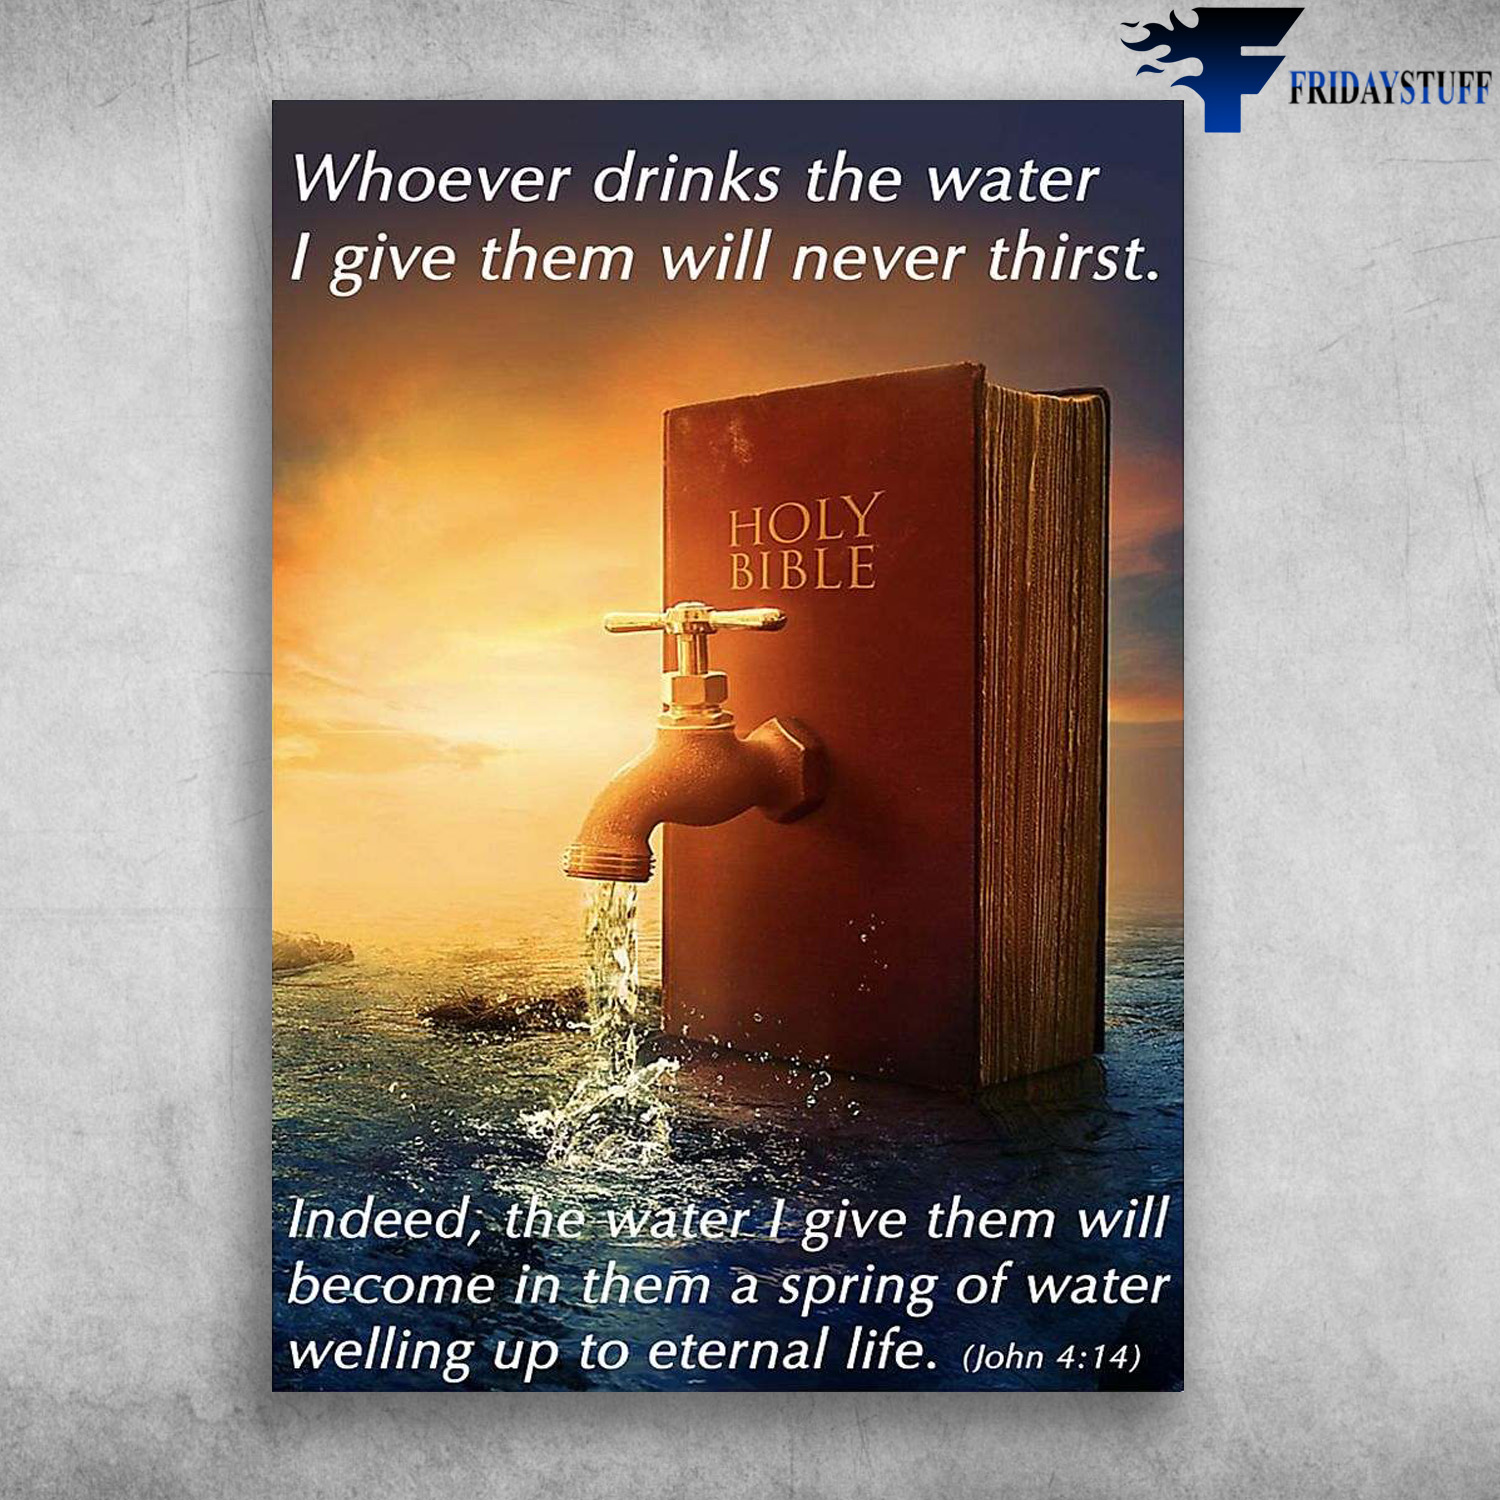 Holy Bible - Whoever Drinks The Water, I Give Them Will Never Thirst, Indeed, The Water I Give Them, Will Become In Them, A Spring Of Water, Welling Up To Eternal Life